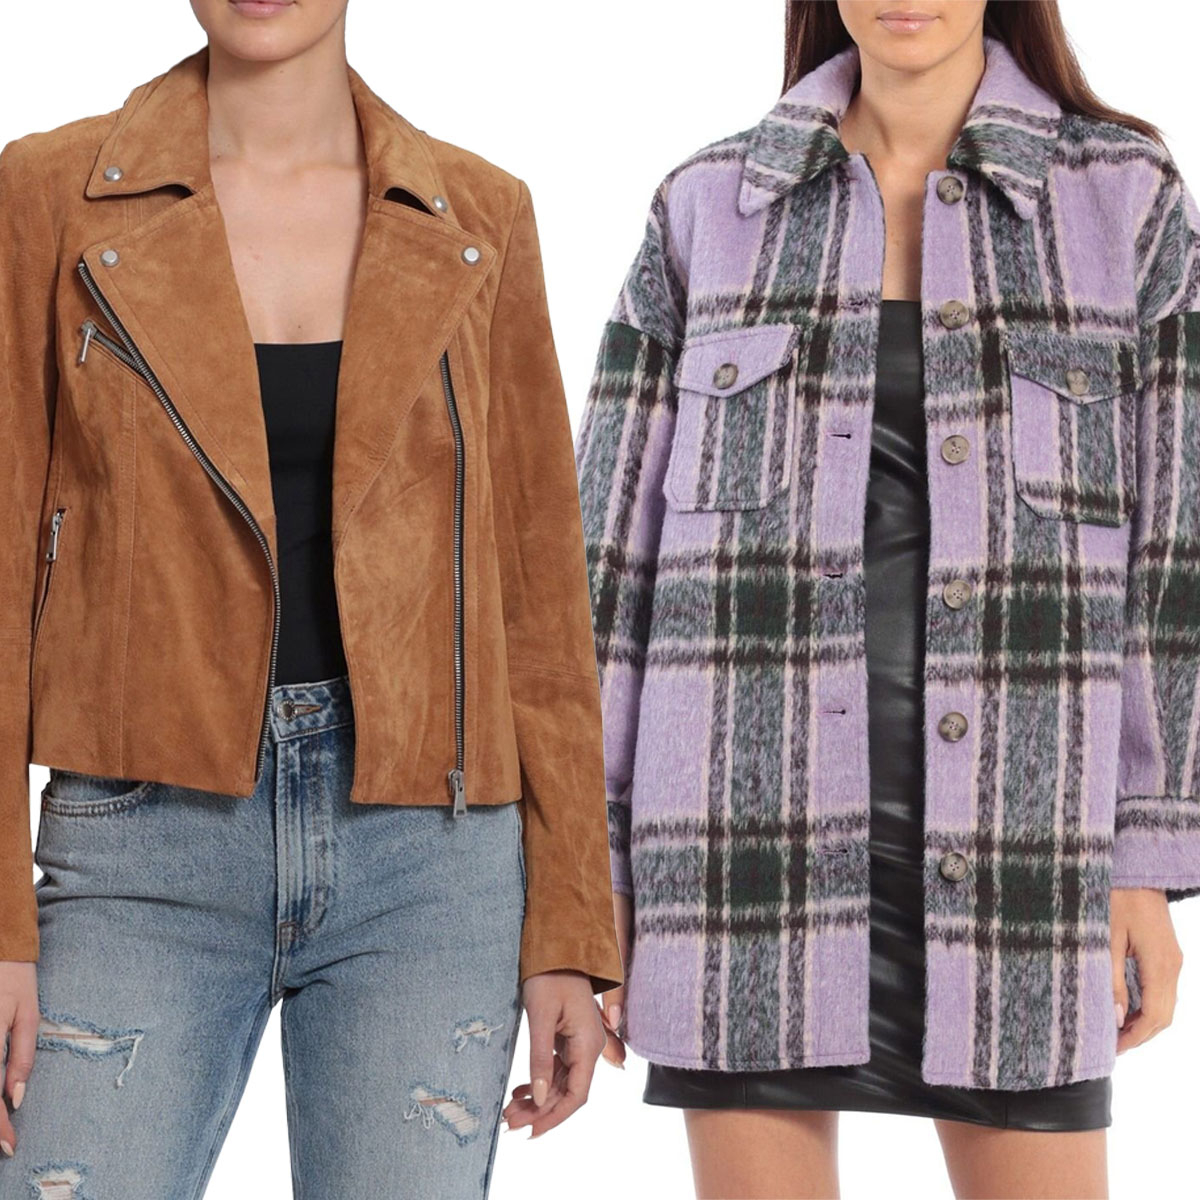 Why Everyone’s Buying These Avec Les Filles Jackets for Fall